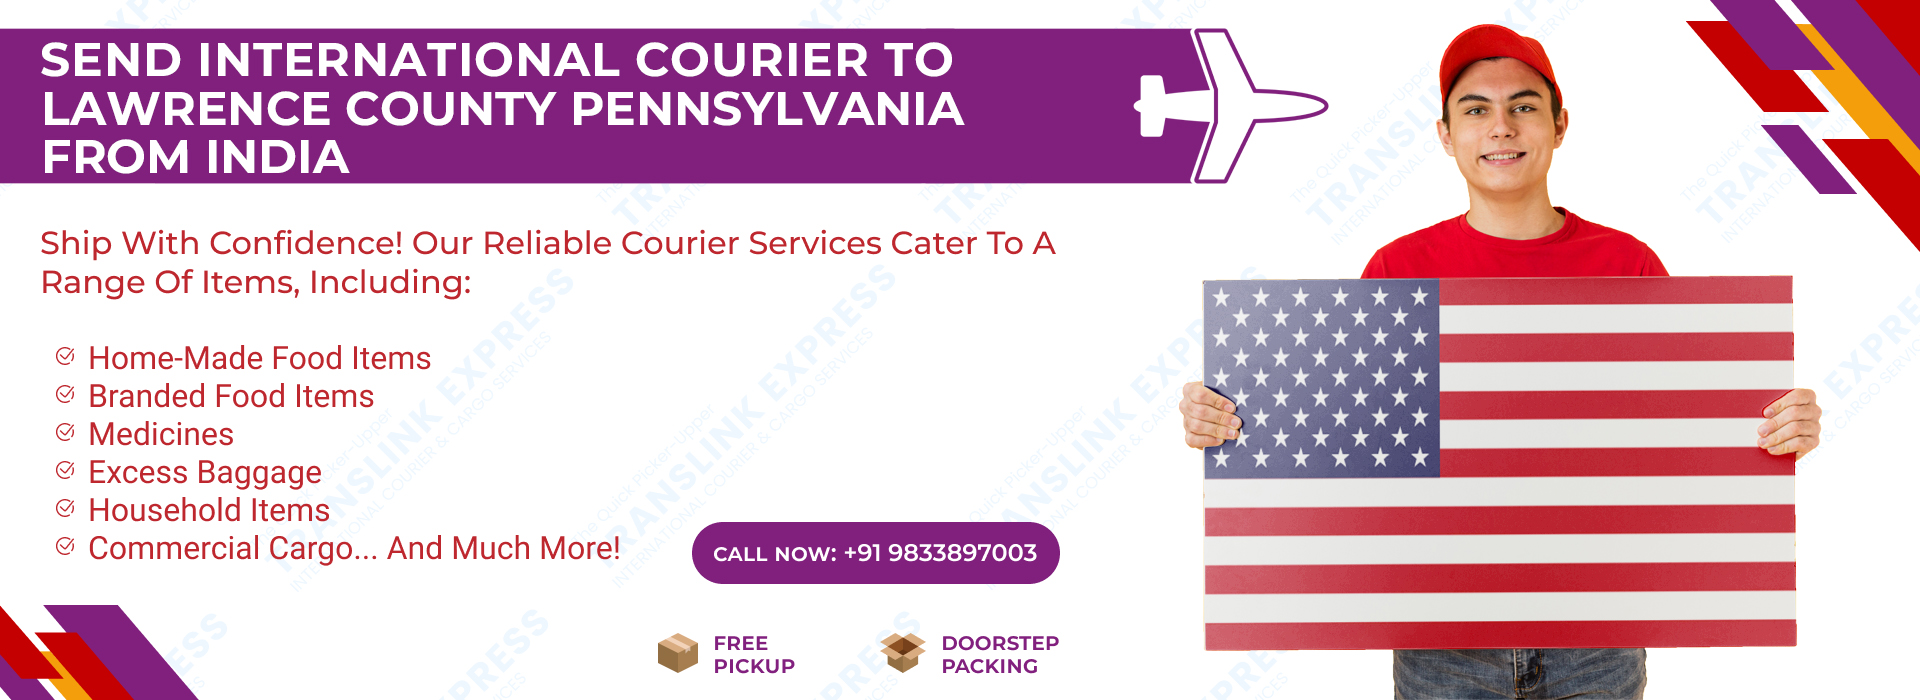 Courier to Lawrence County Pennsylvania From India